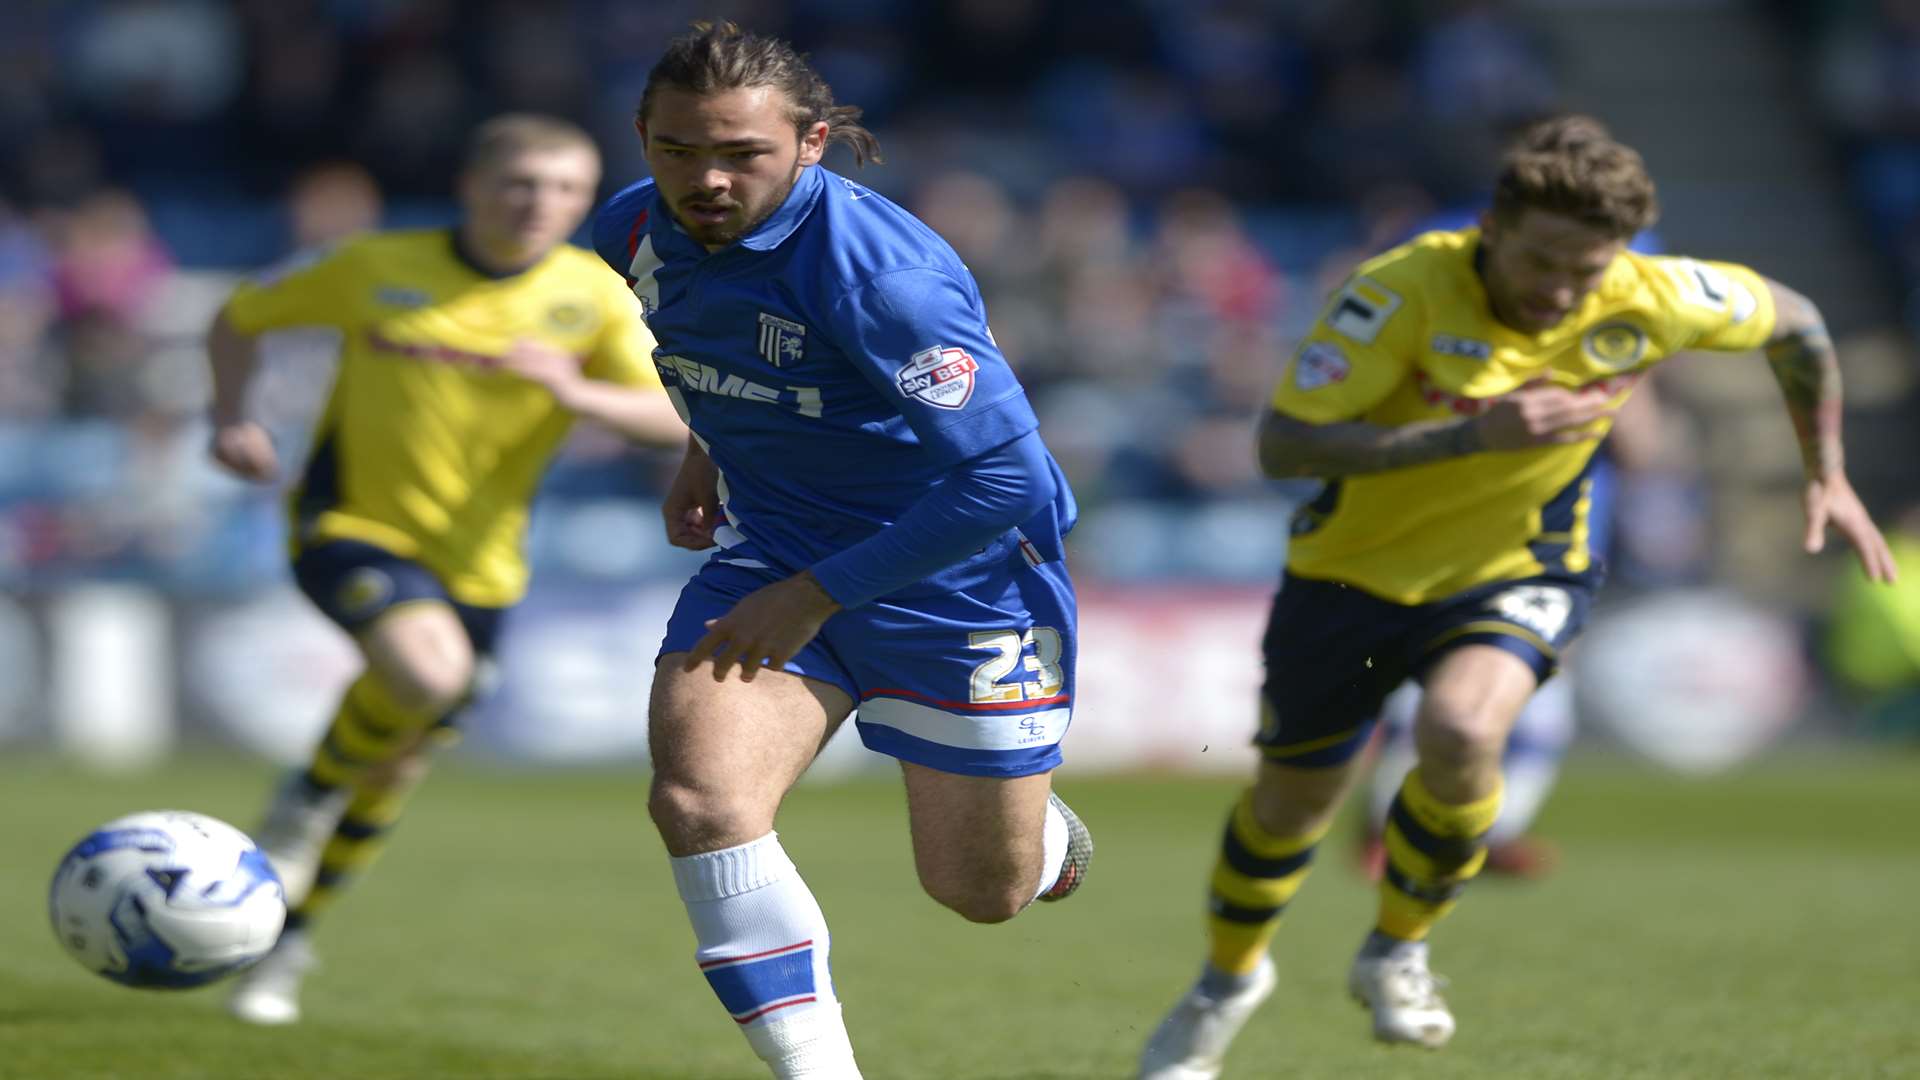 Bradley Dack in action during his 100th game for Gills on Saturday. Picture: Barry Goodwin